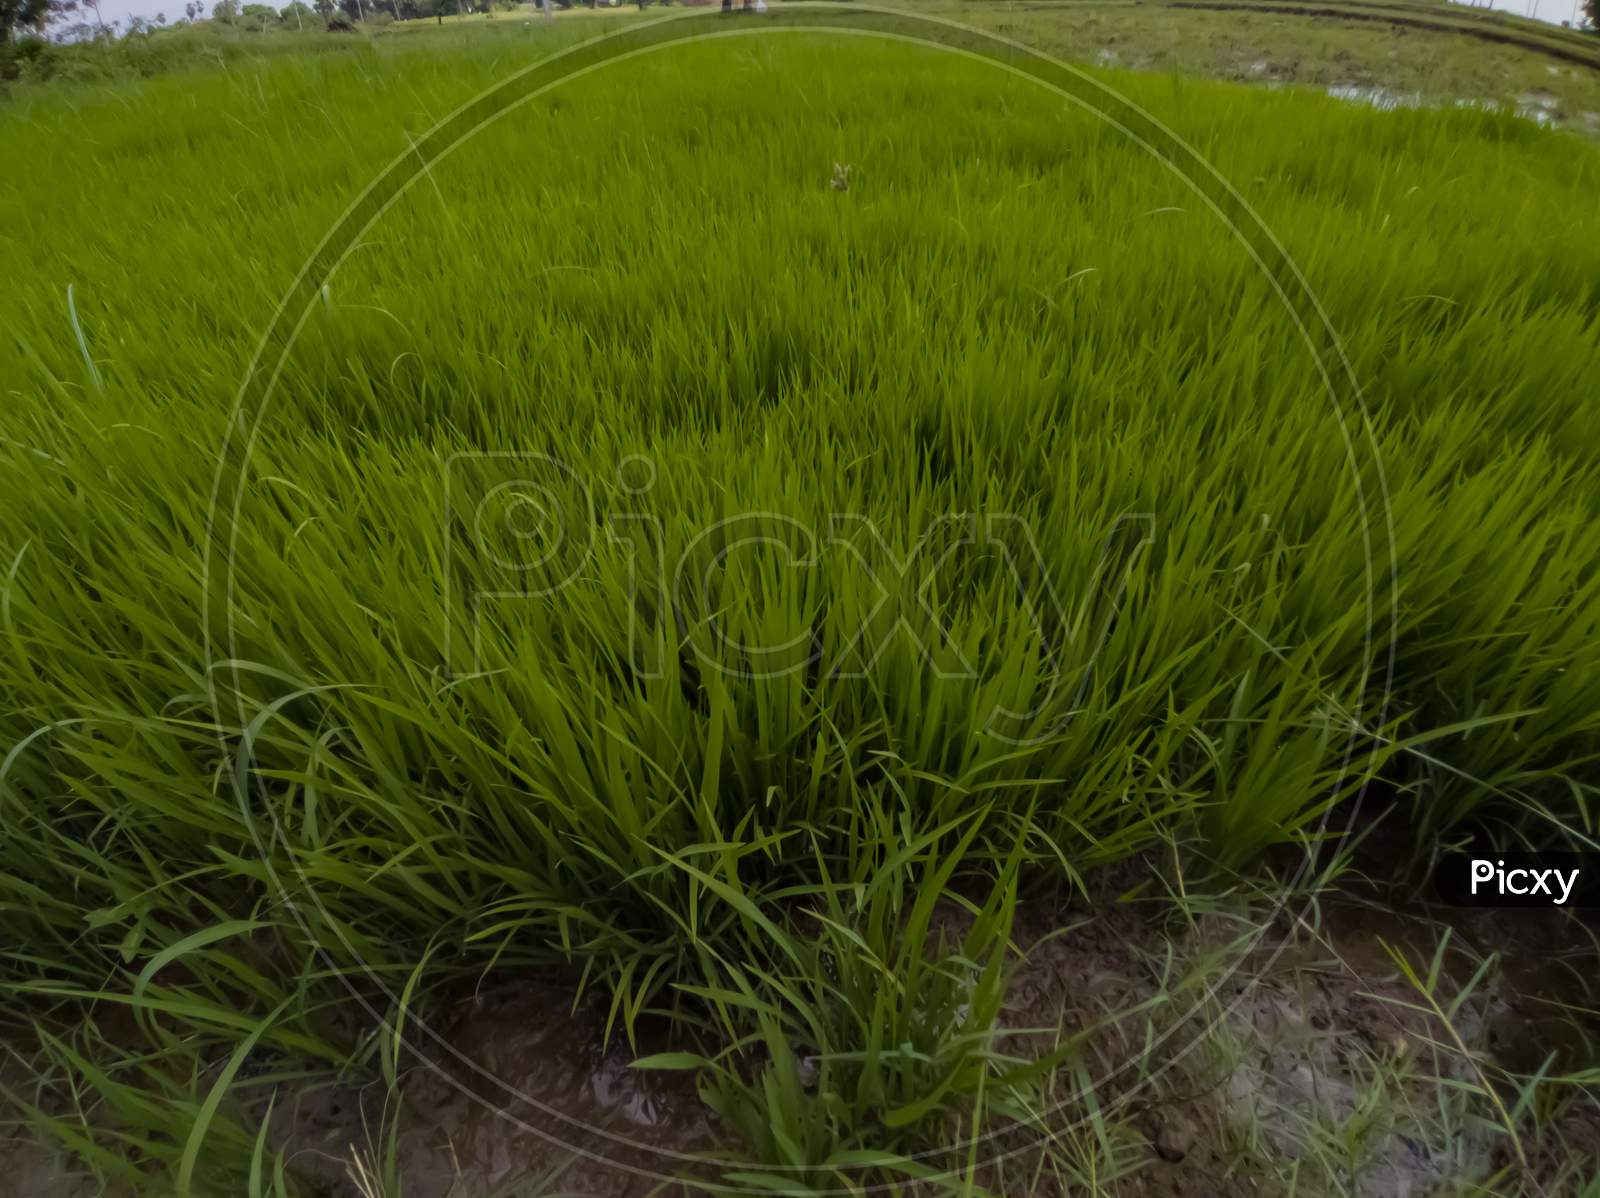 Paddy field in India. Paddy fields. Paddy leaves. Agriculture fields in India. Agriculture fields.